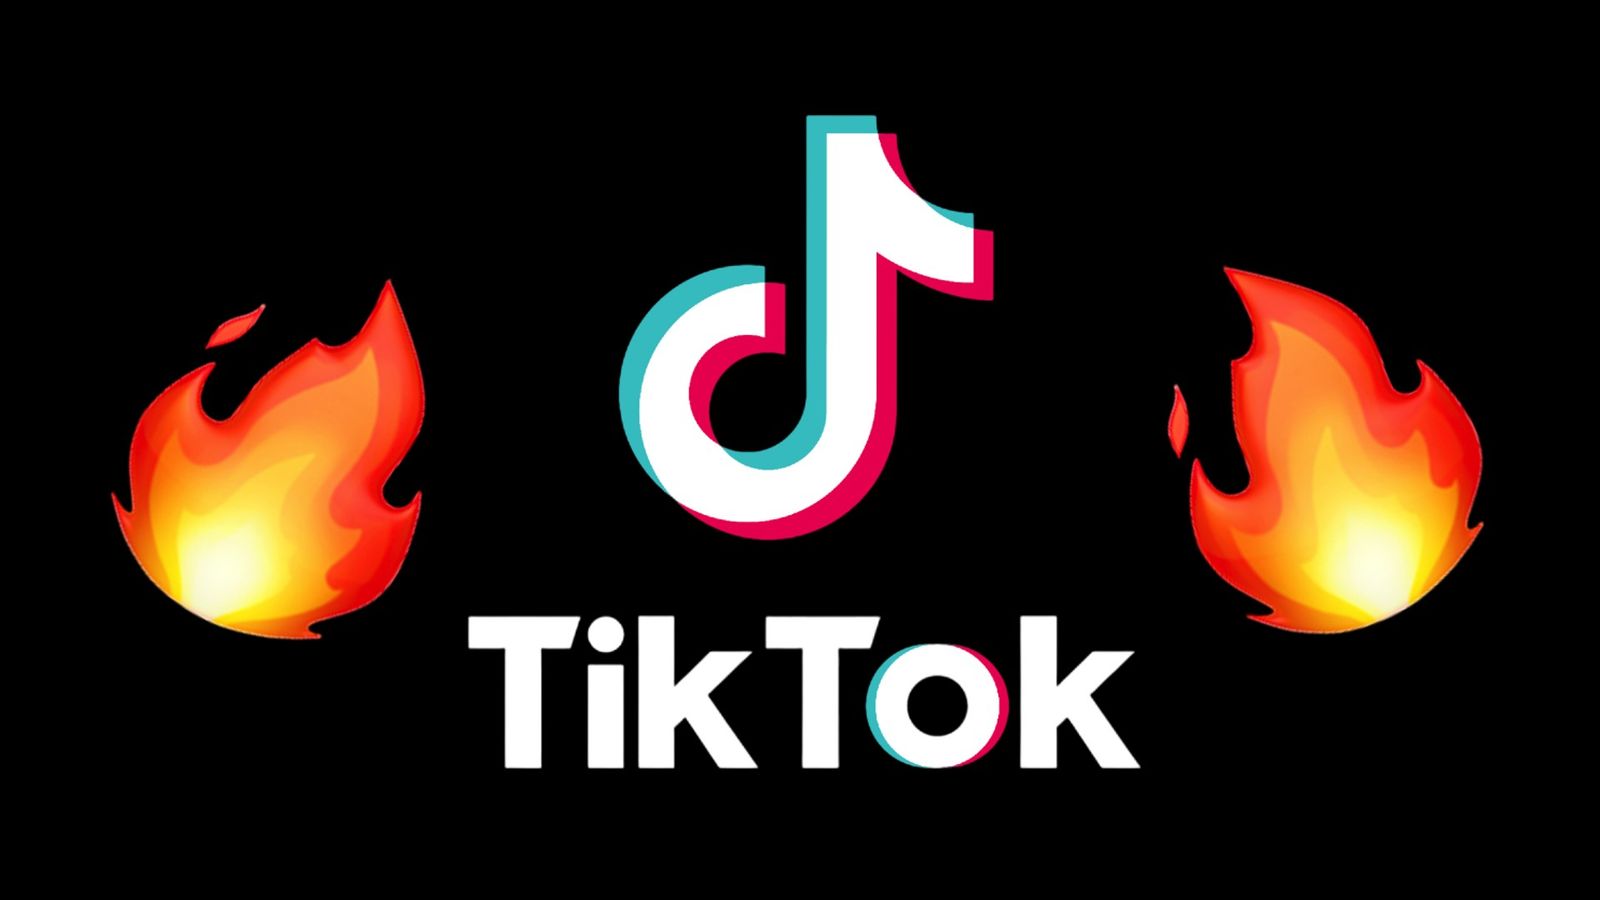 The TikTok Logo in front of a black background with two Apple Fire emojis on either side